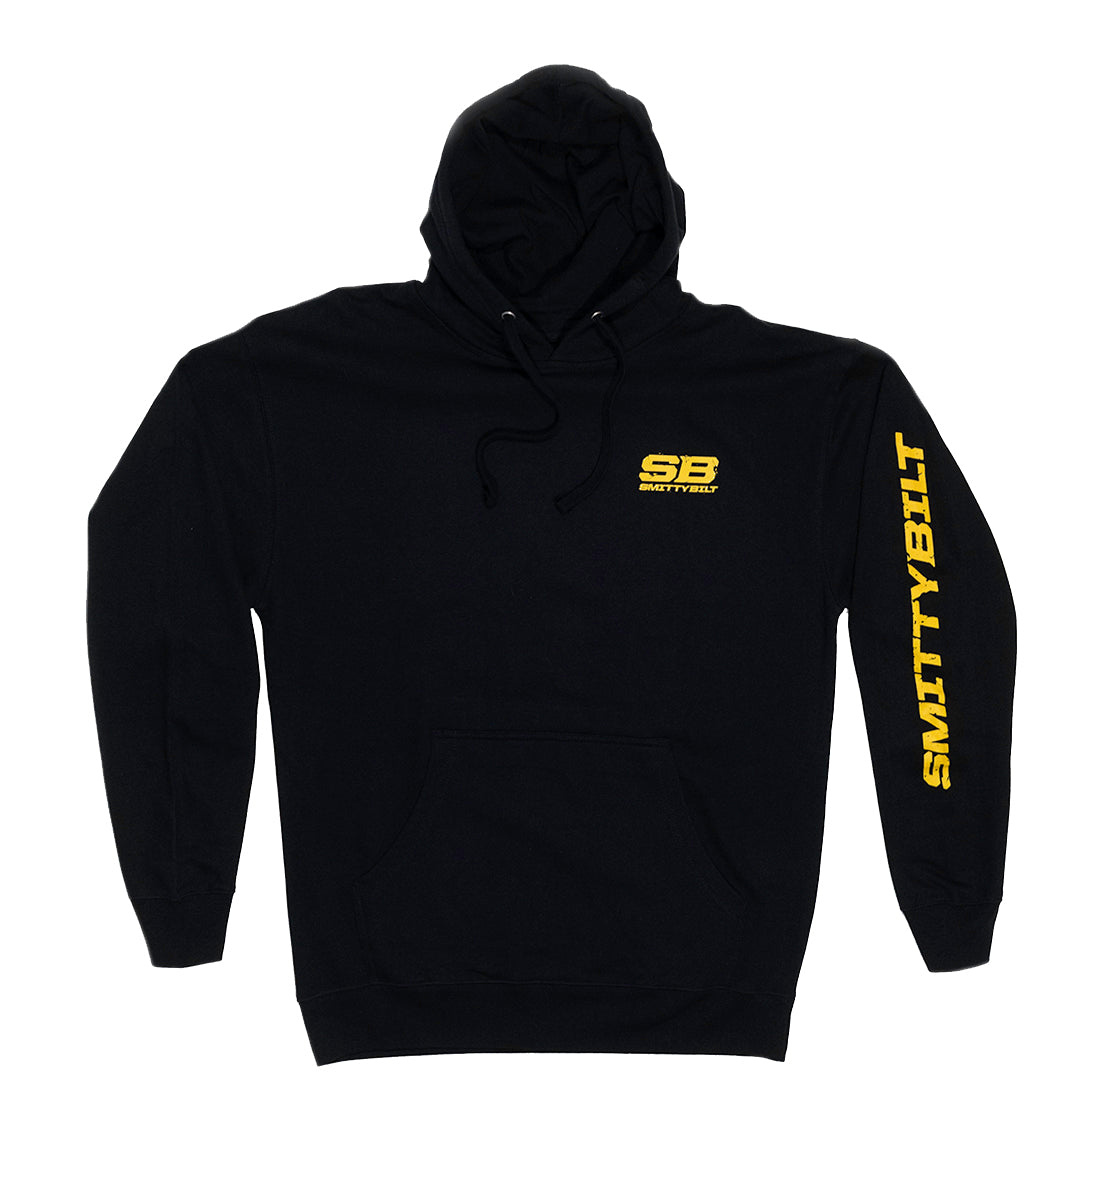 SmittyBilt TRAIL RATED Pulllover Hoodie